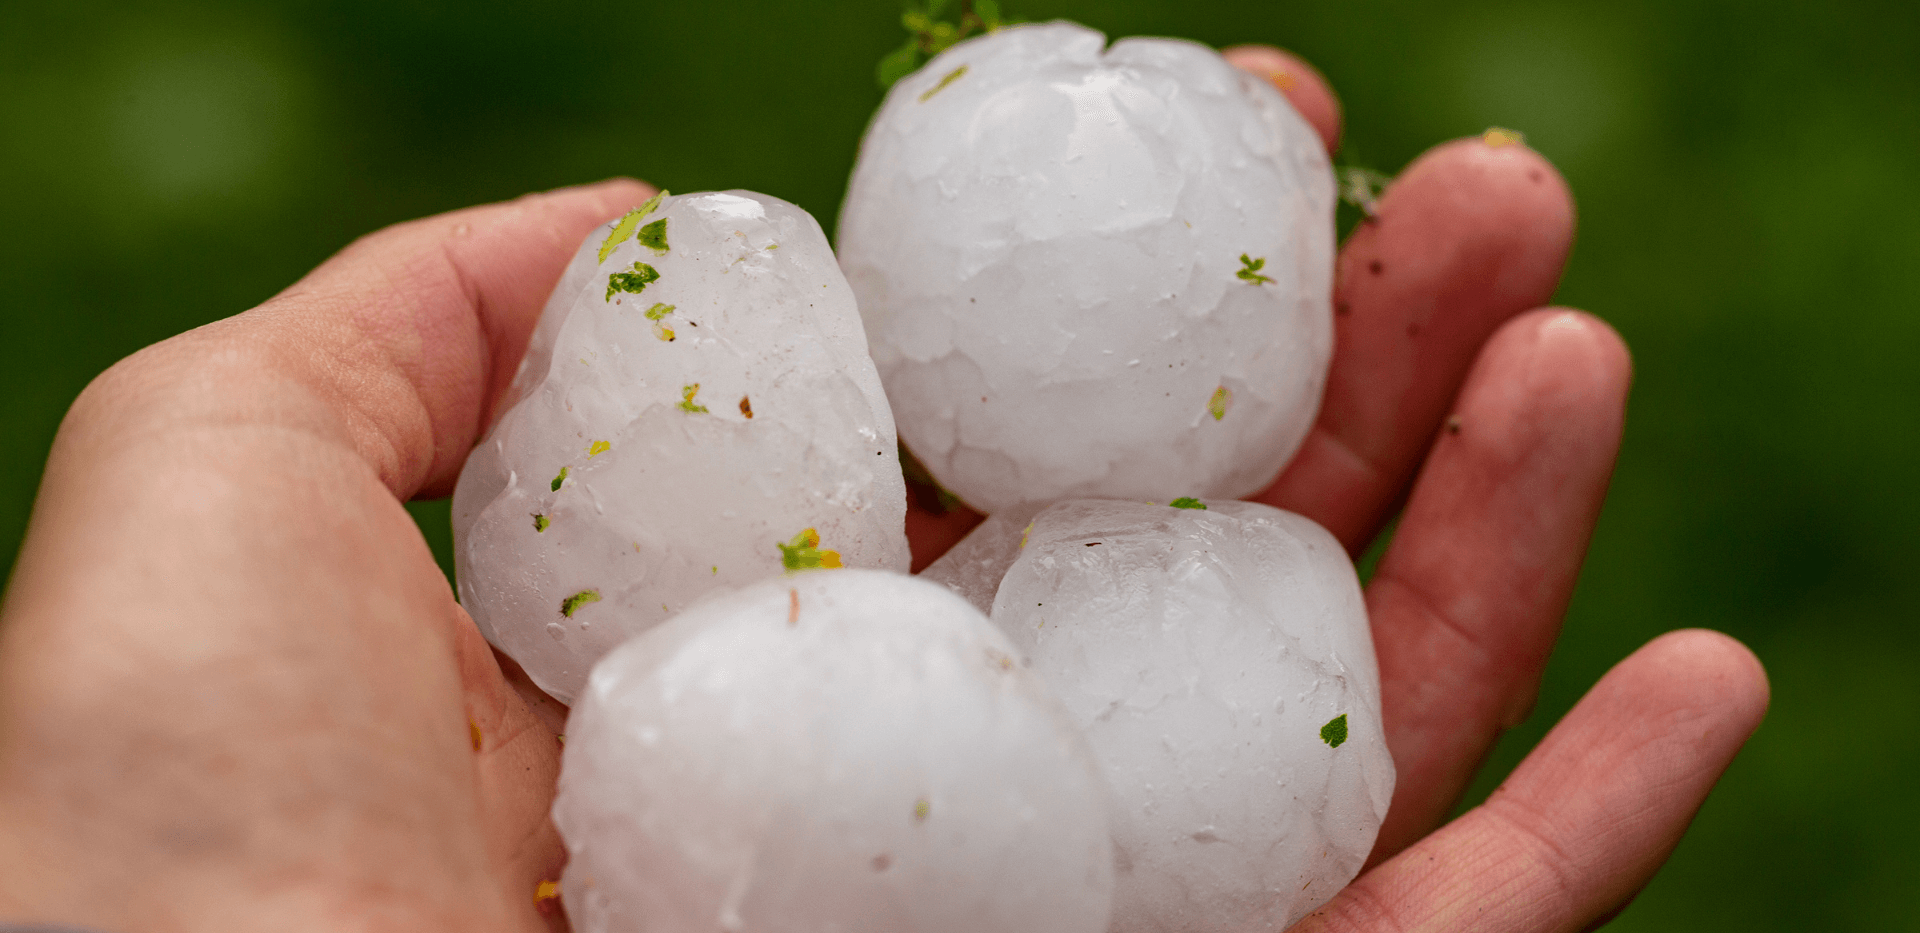 Four large hailstones held in hand